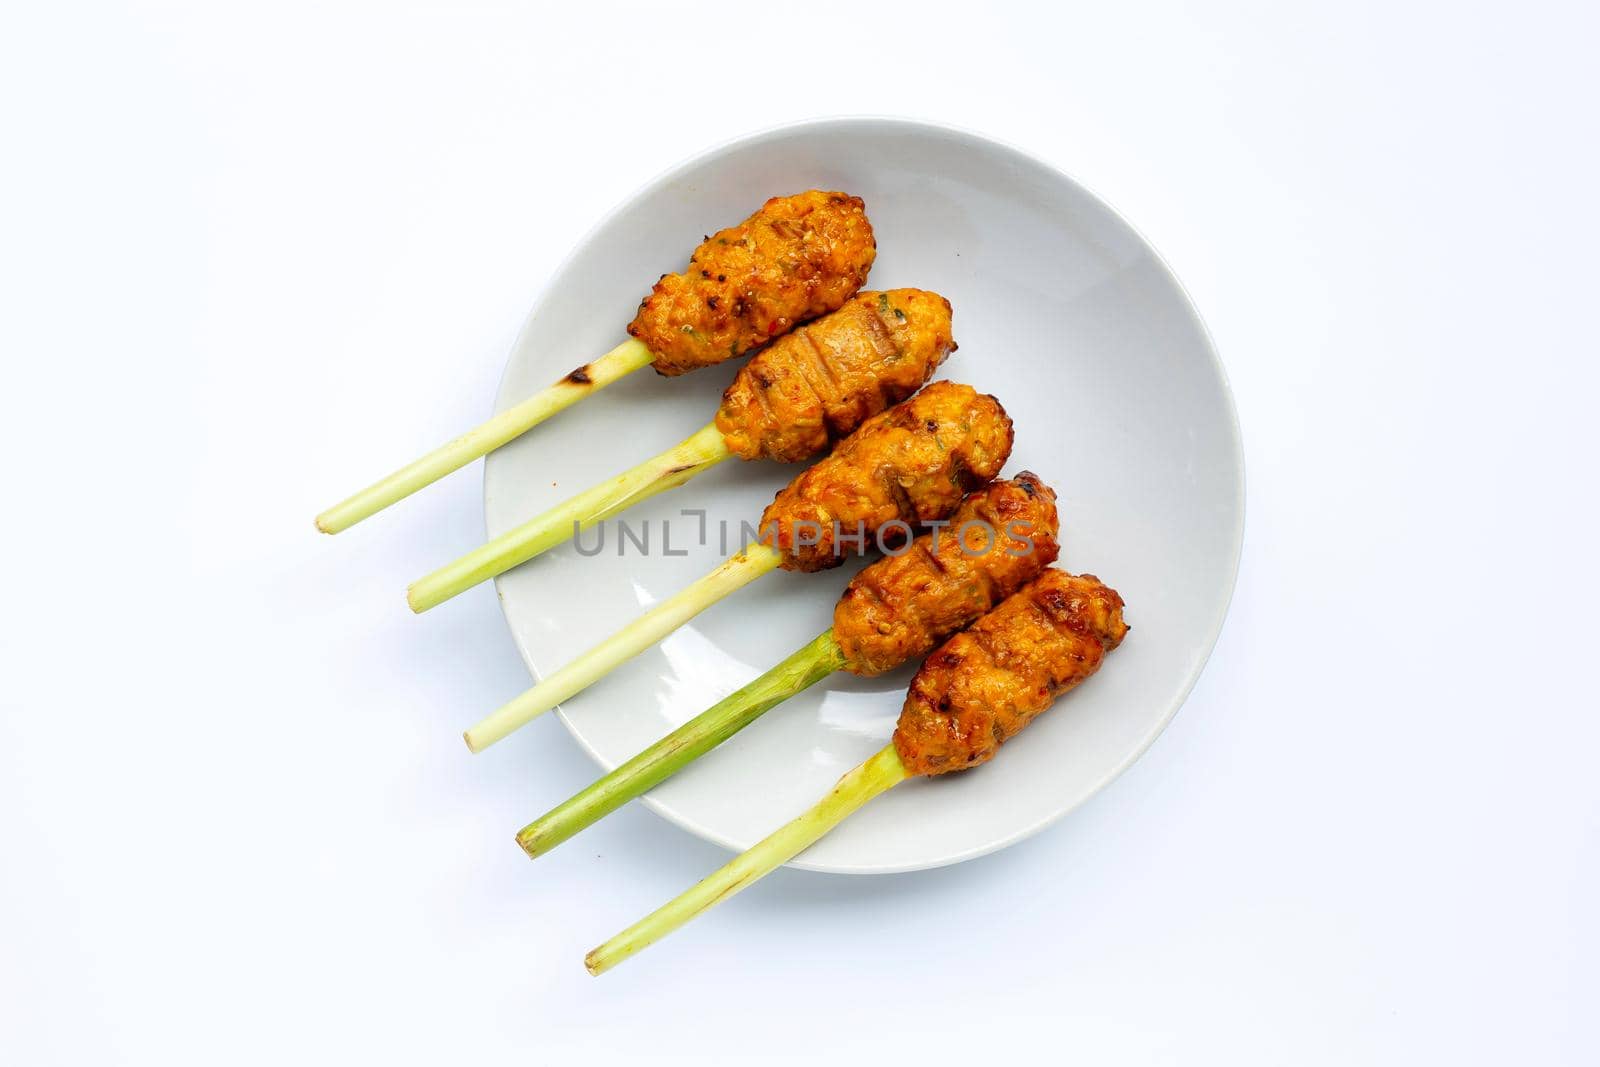 Grilled minced chicken with curry paste and coconut cream on lemongrass skewers. Top view